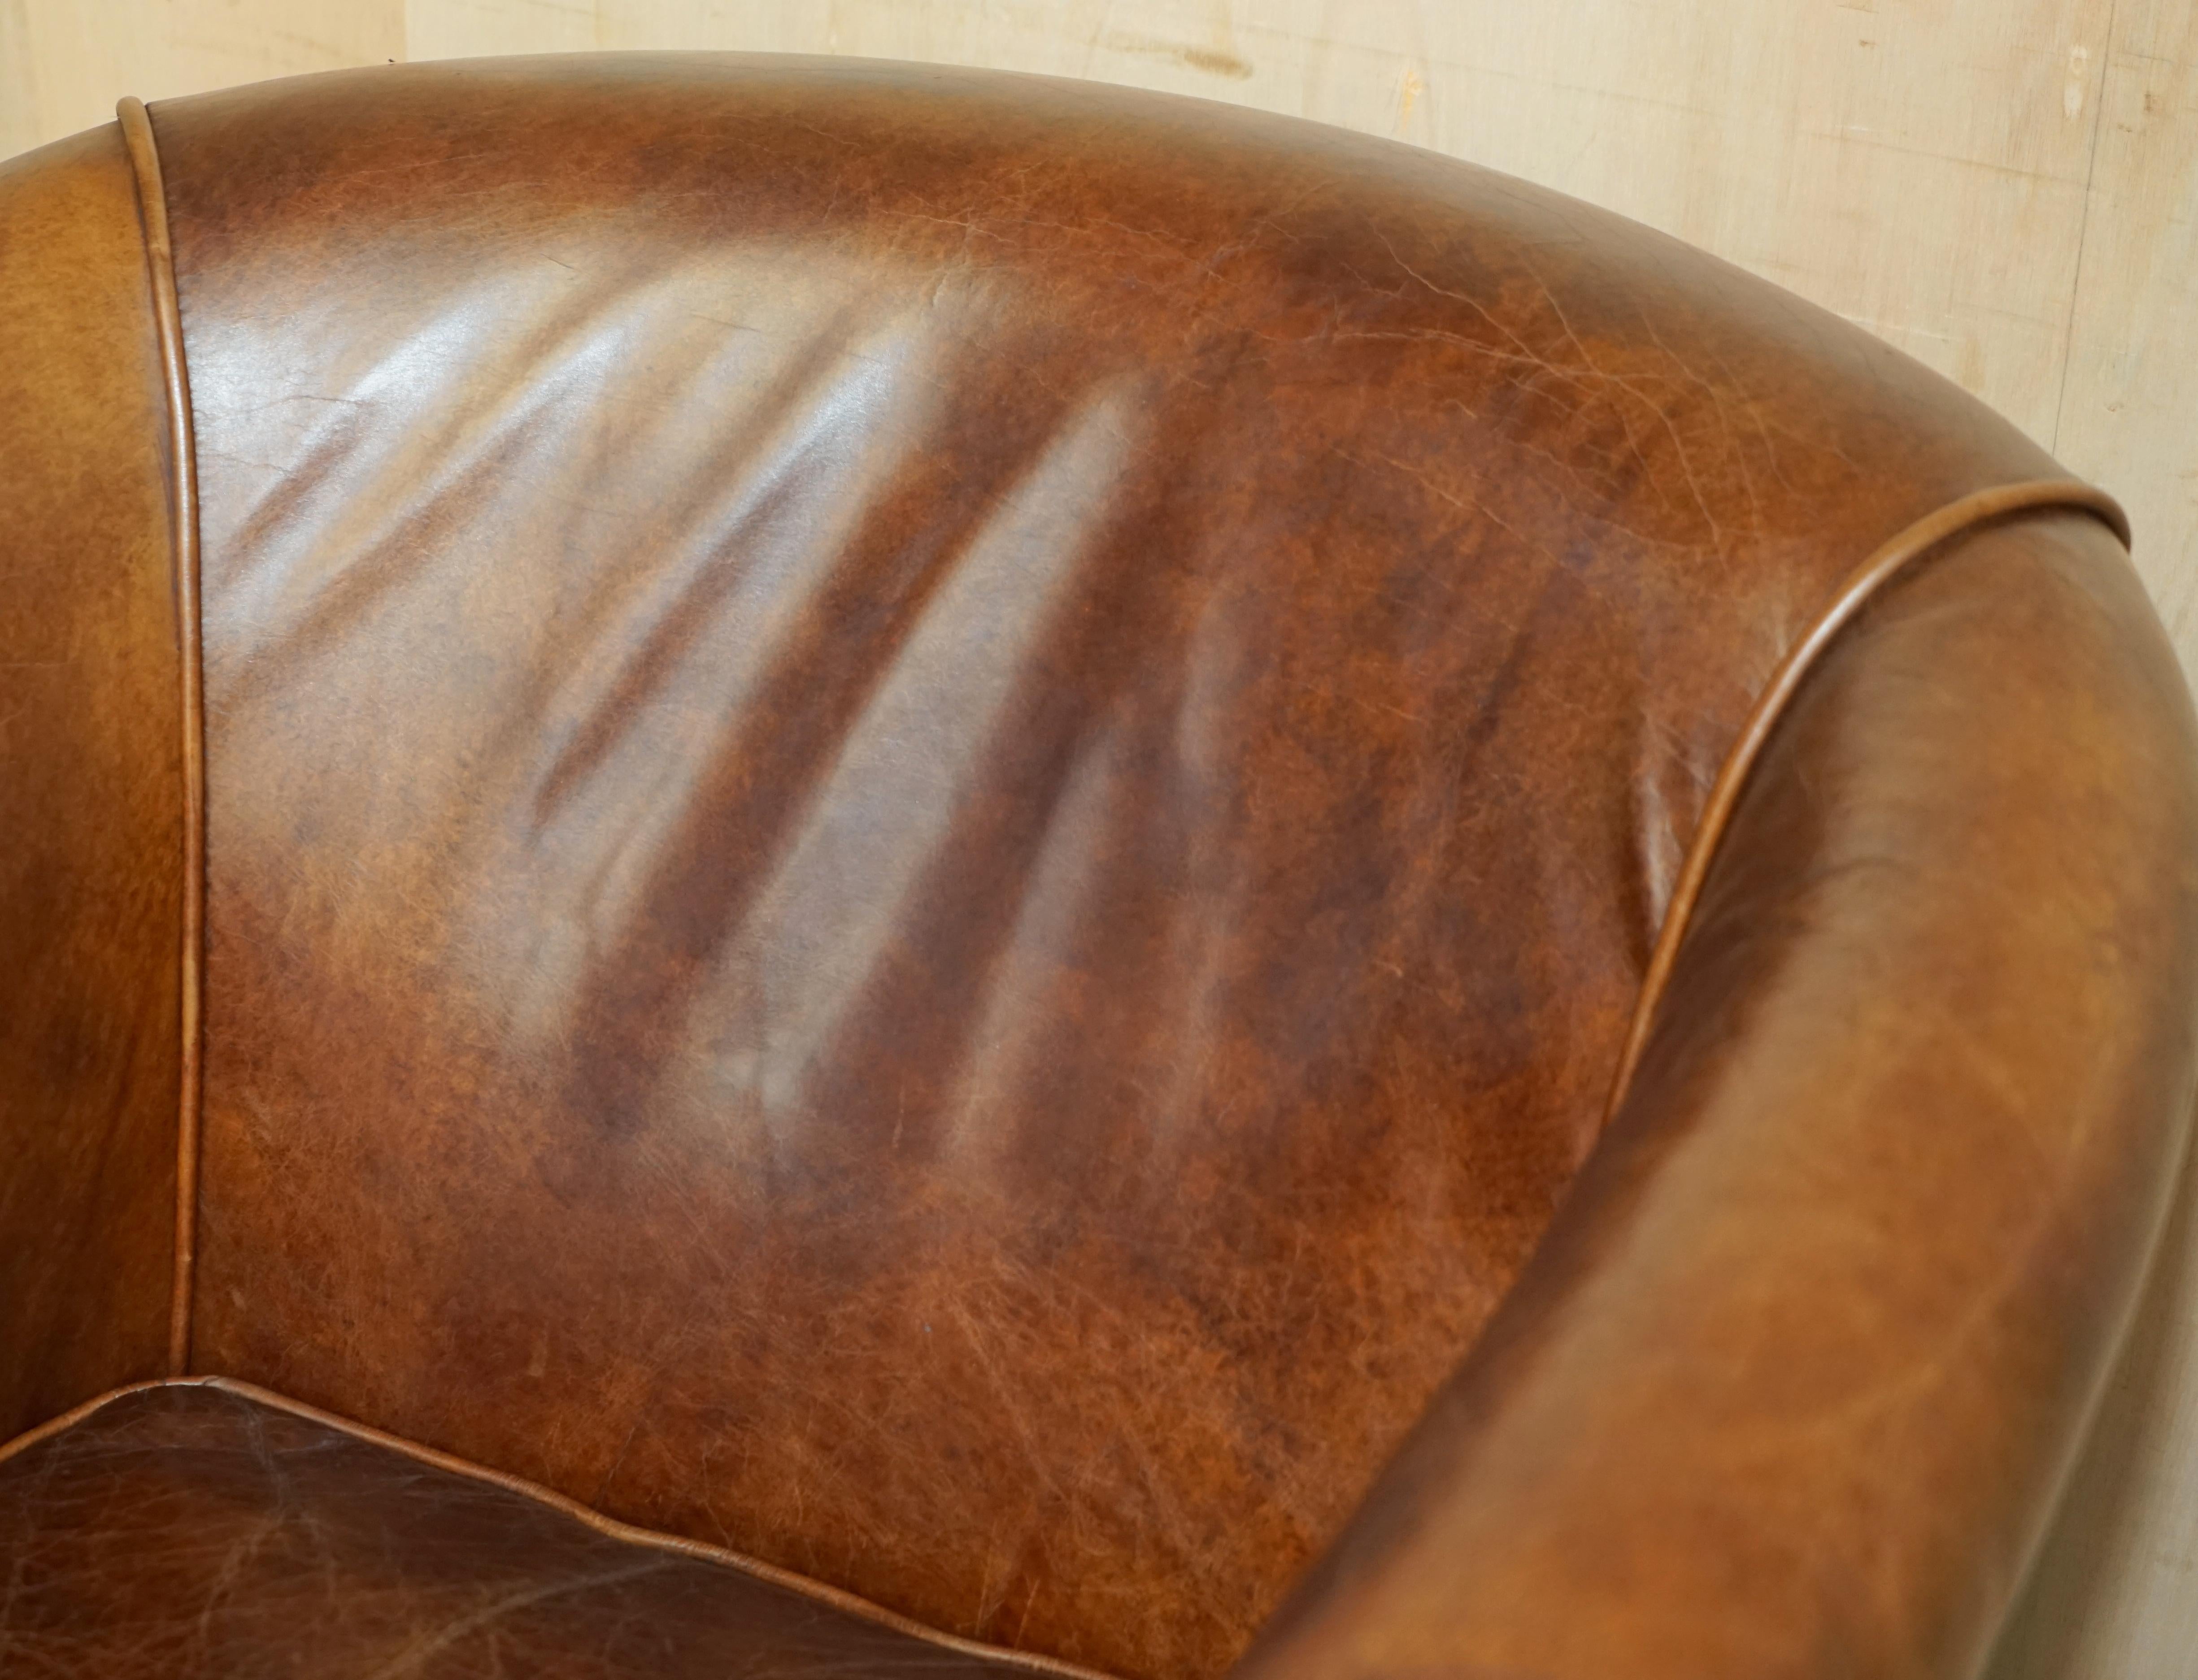 AGED HERiTAGE BROWN LEATHER BIKER TAN CLUB TUB ARMCHAIR MUST SEE LOVELY PATINa!! (Englisch) im Angebot